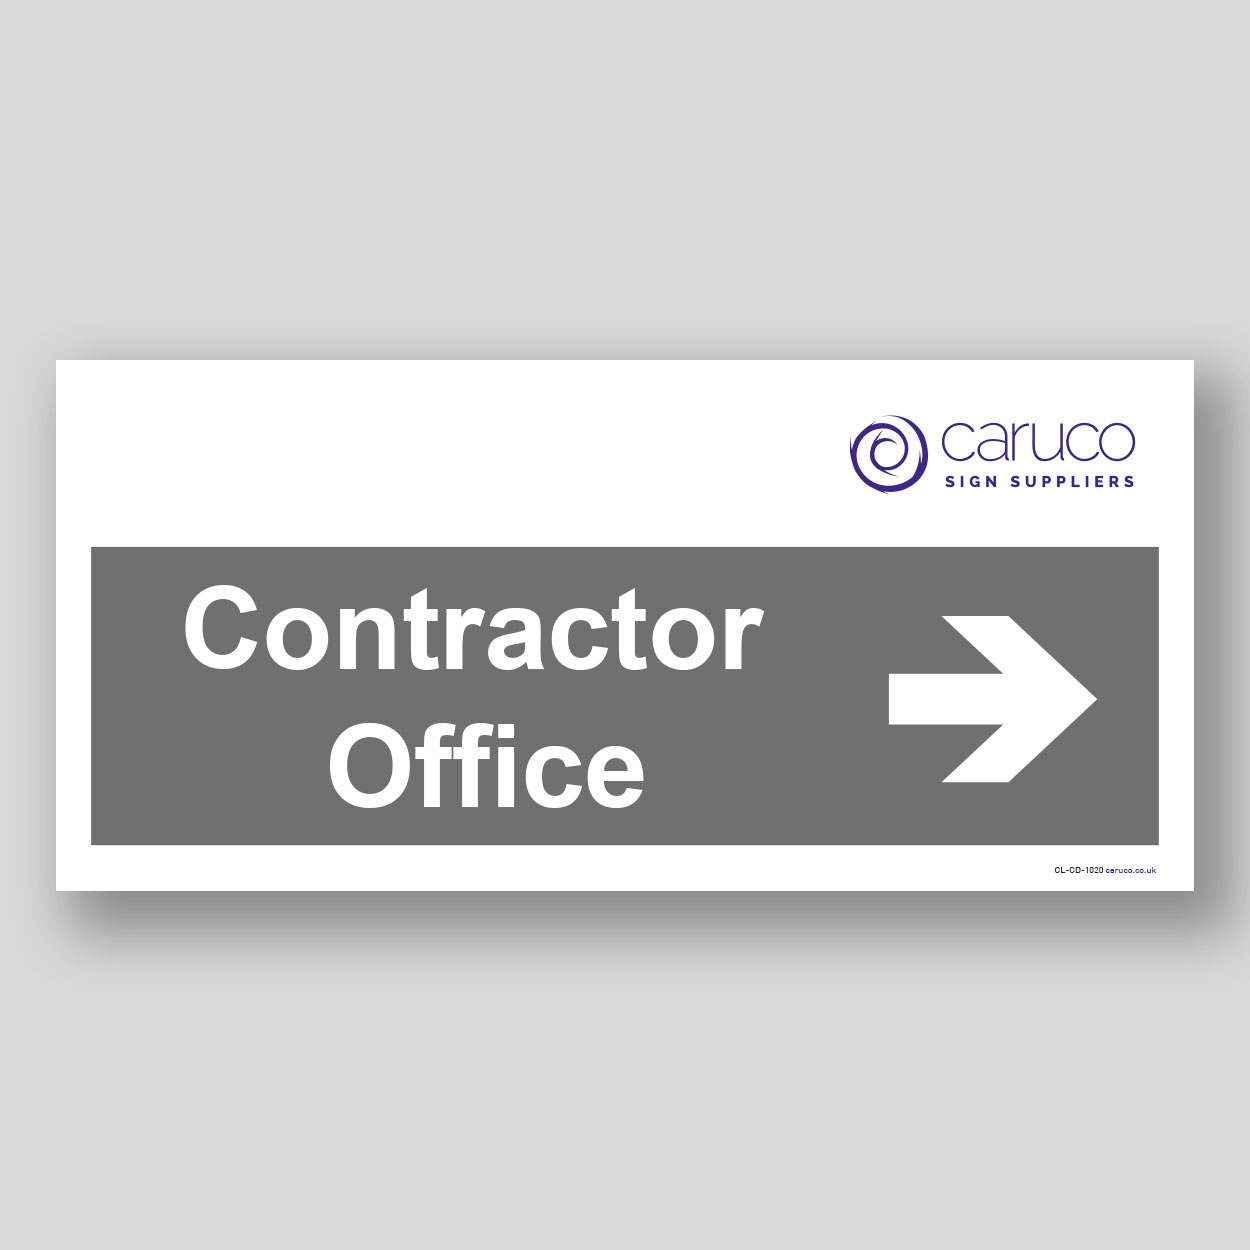 CL-CD-1025 Contractor office with right arrow